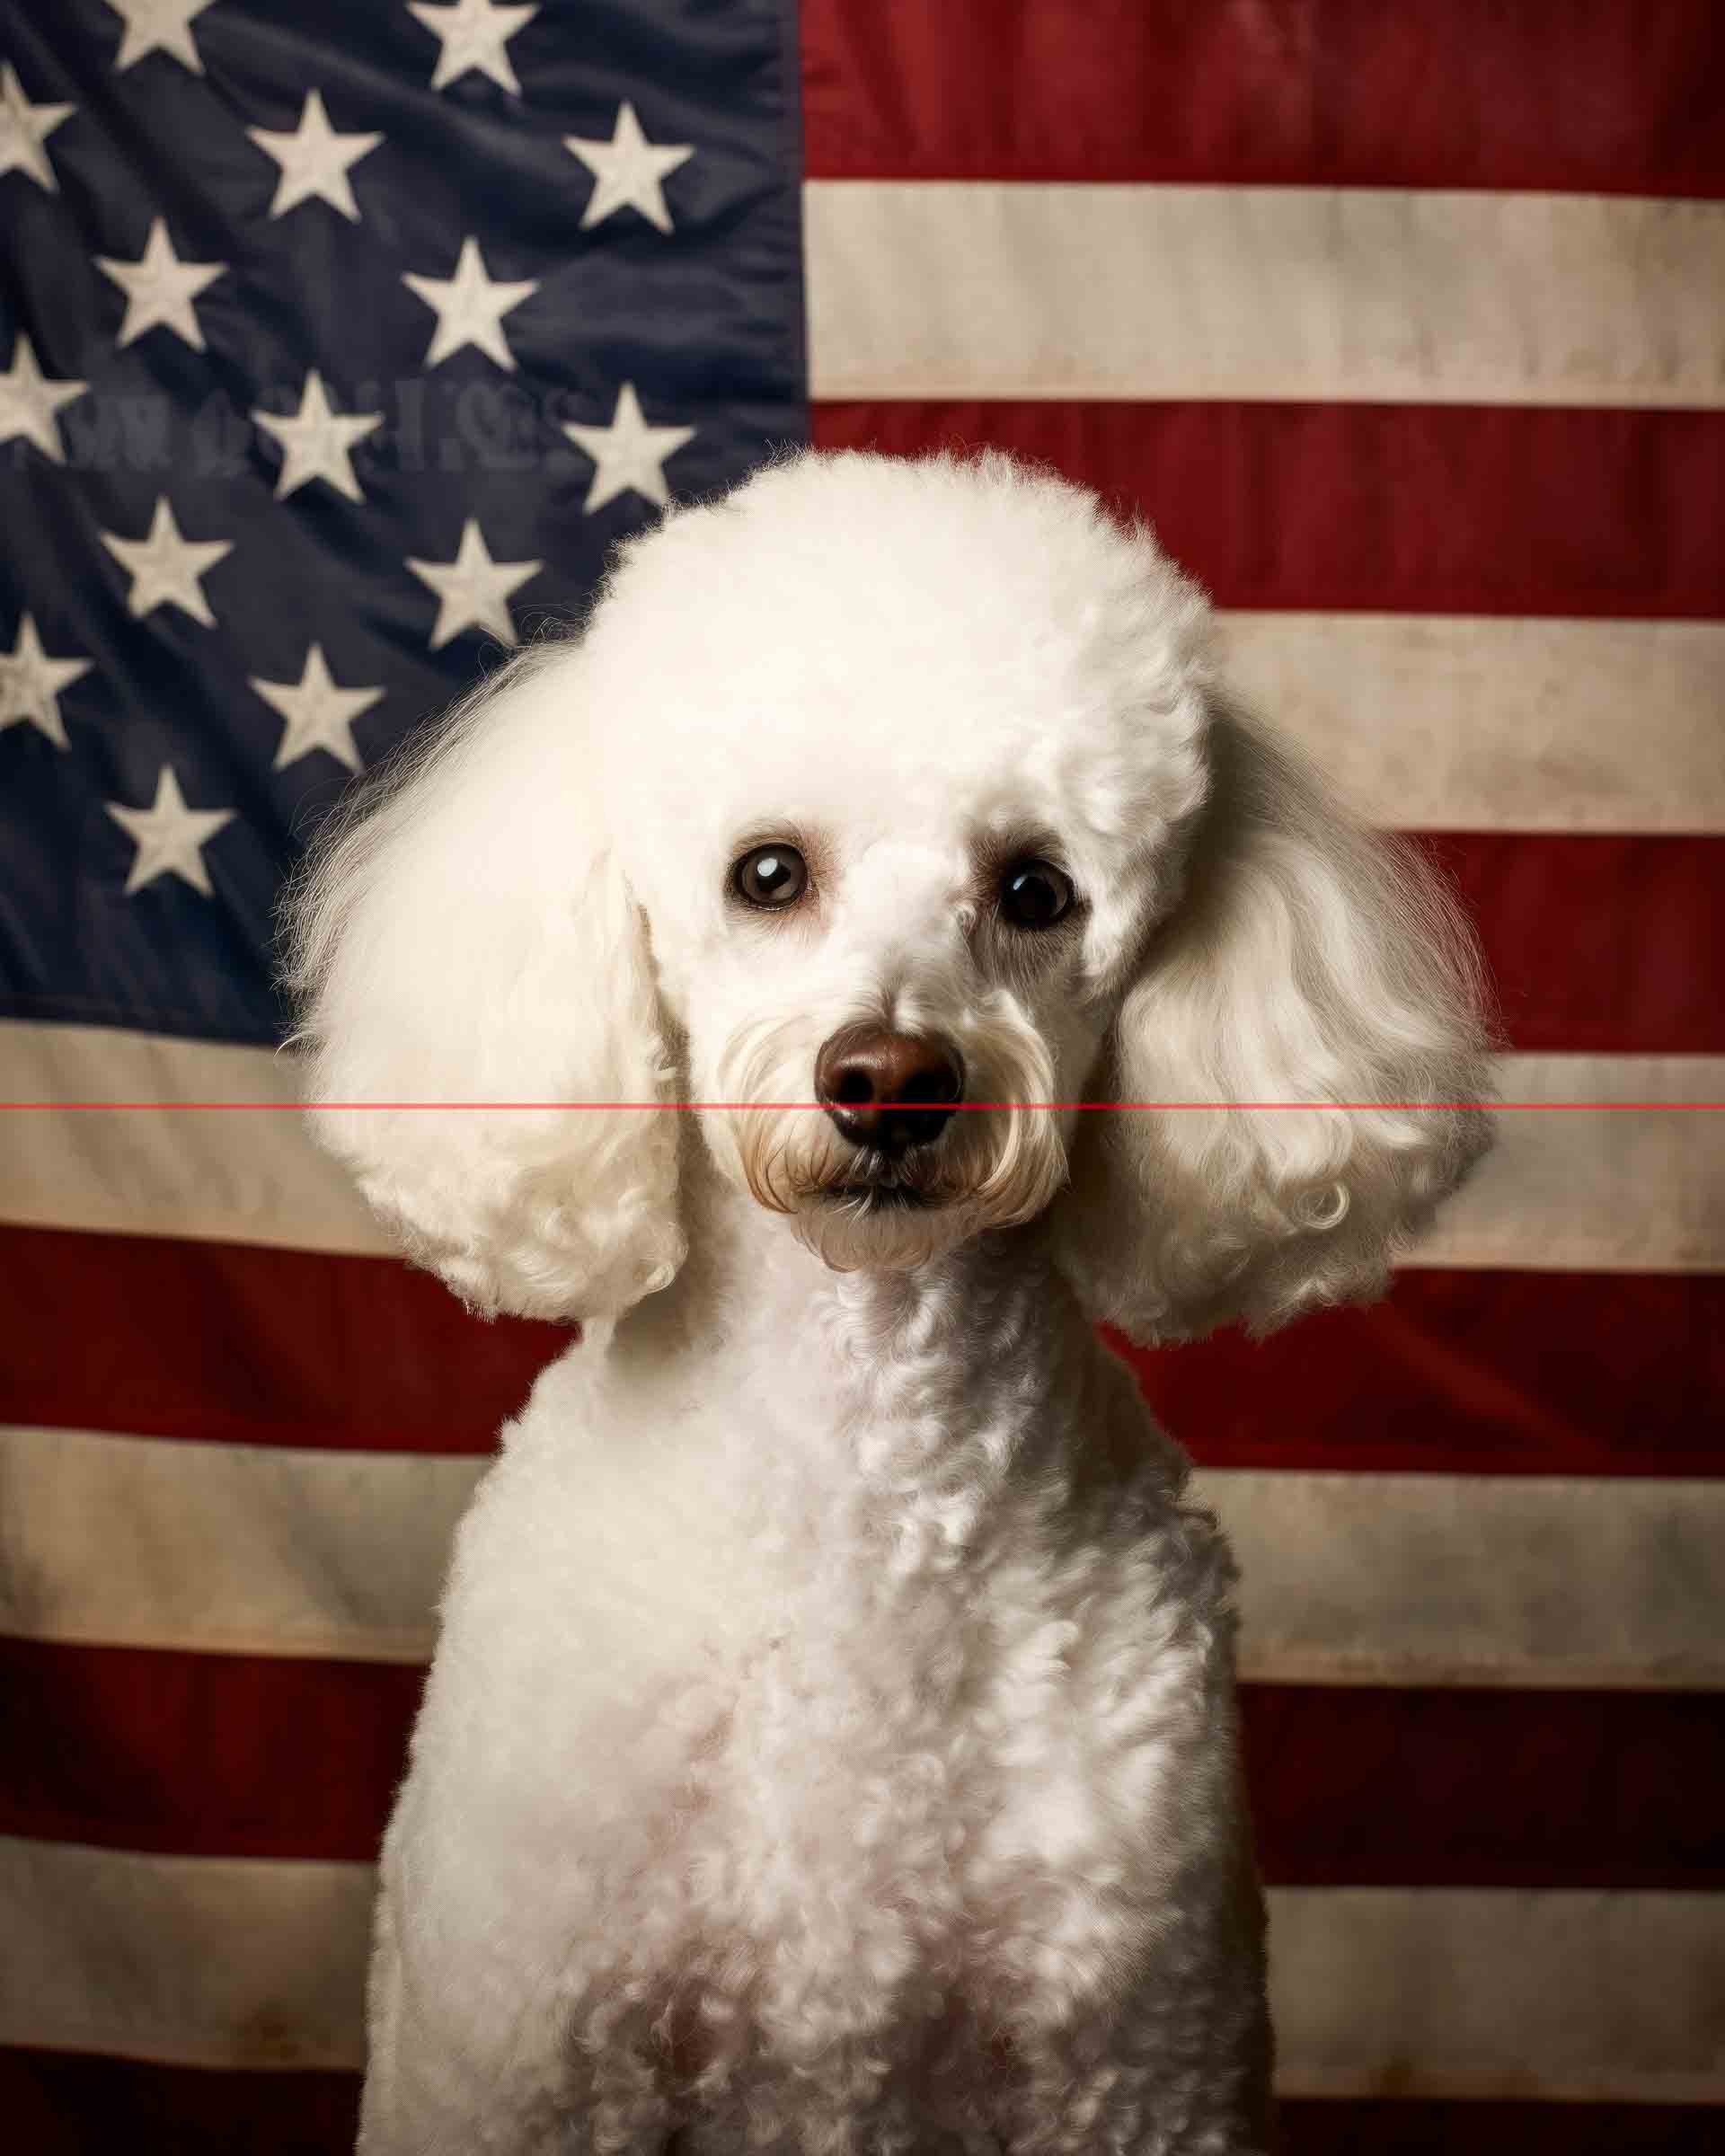 A picture of a white toy poodle with a fluffy coat and iconic groom sits in front of an american flag, looking directly at the viewer with an attentive expression.